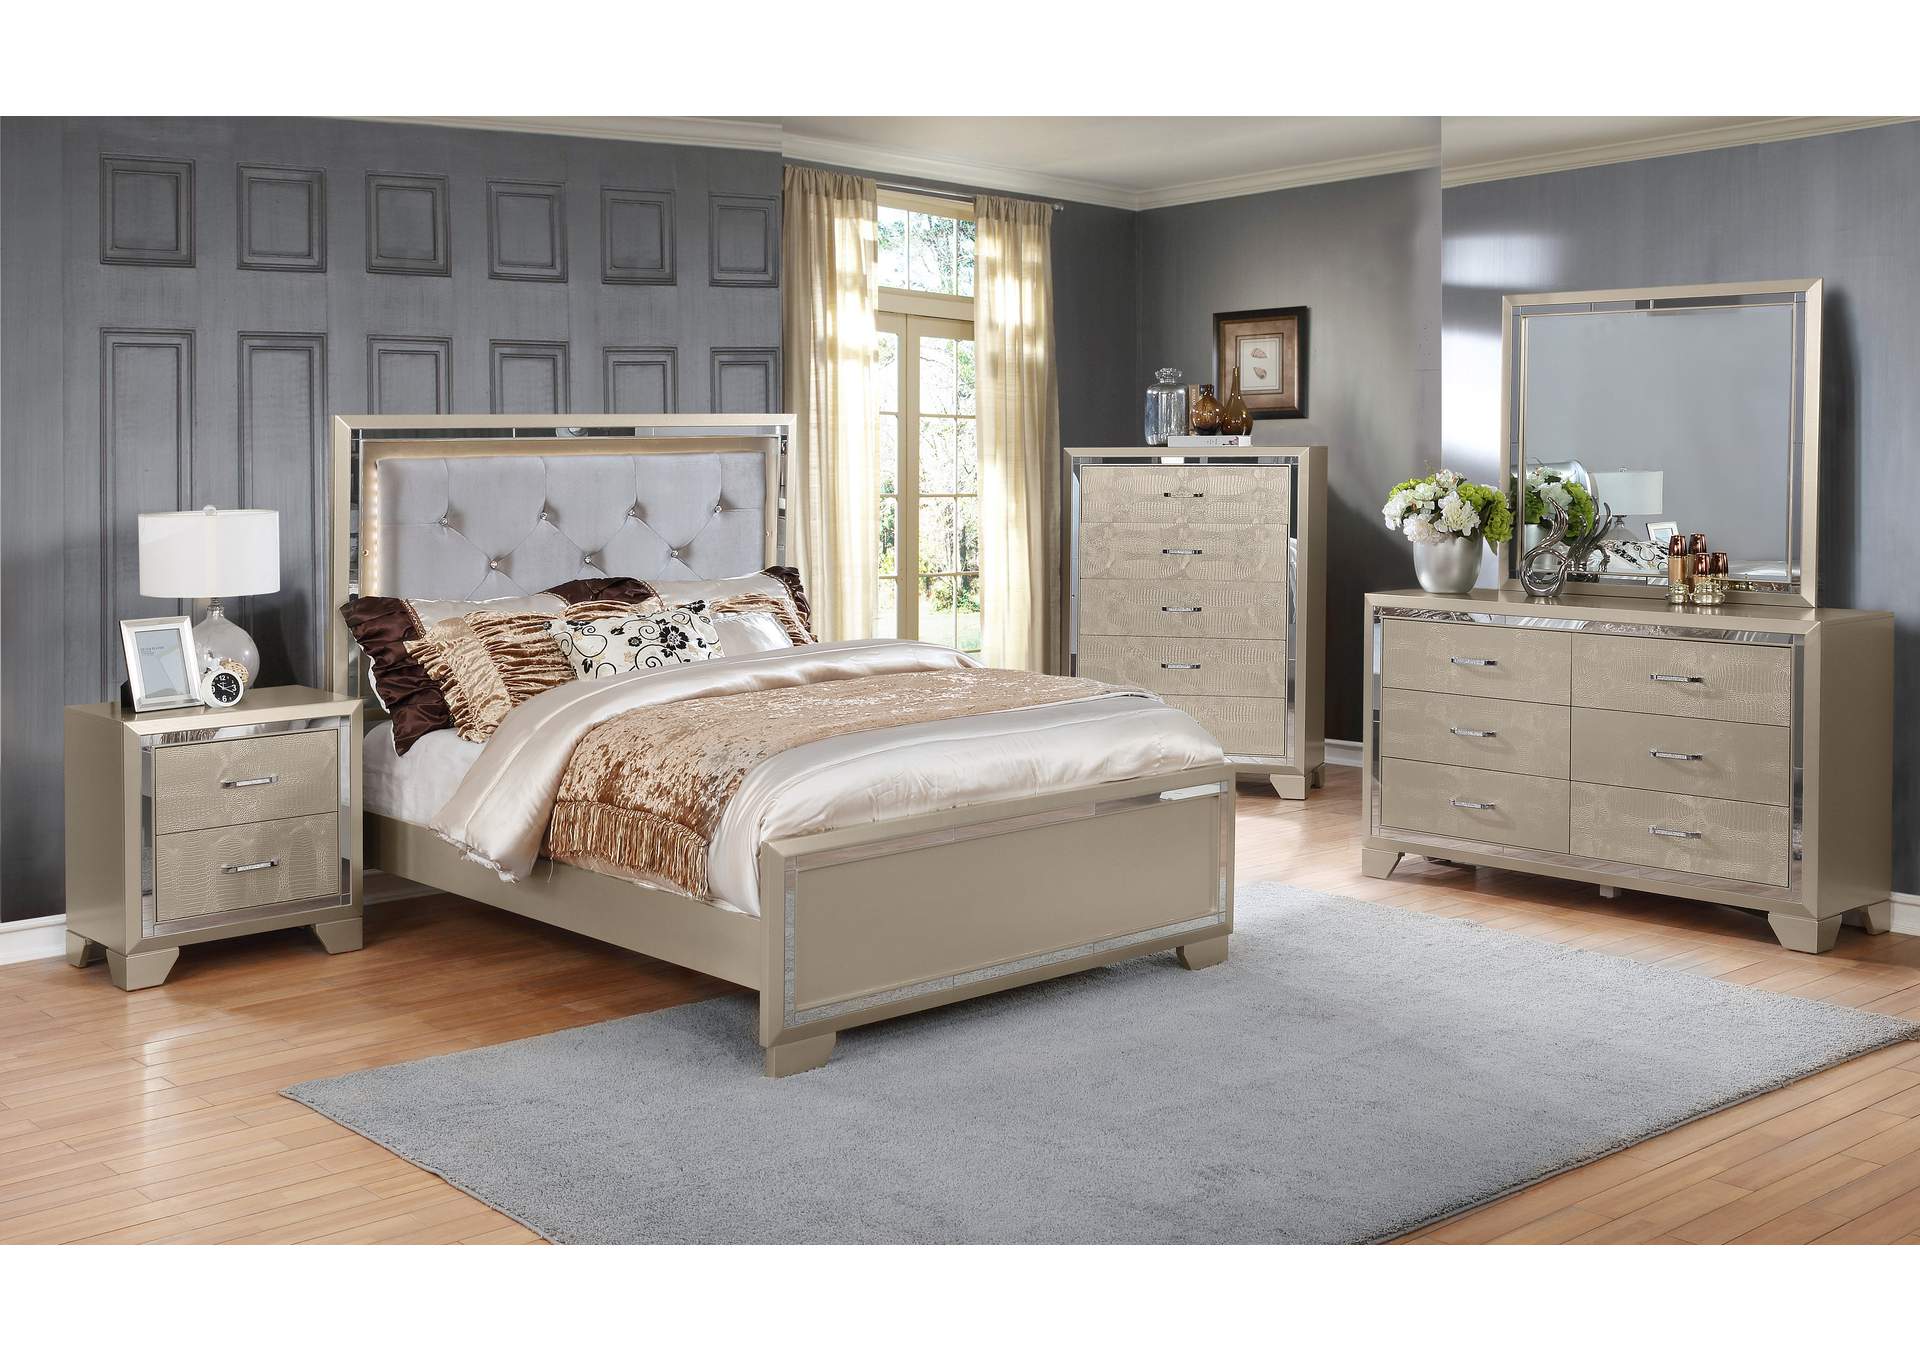 Rozzelli Pearl Panel Queen 4 Piece Bedroom Set W/ Chest, Dresser & Mirror,Global Trading